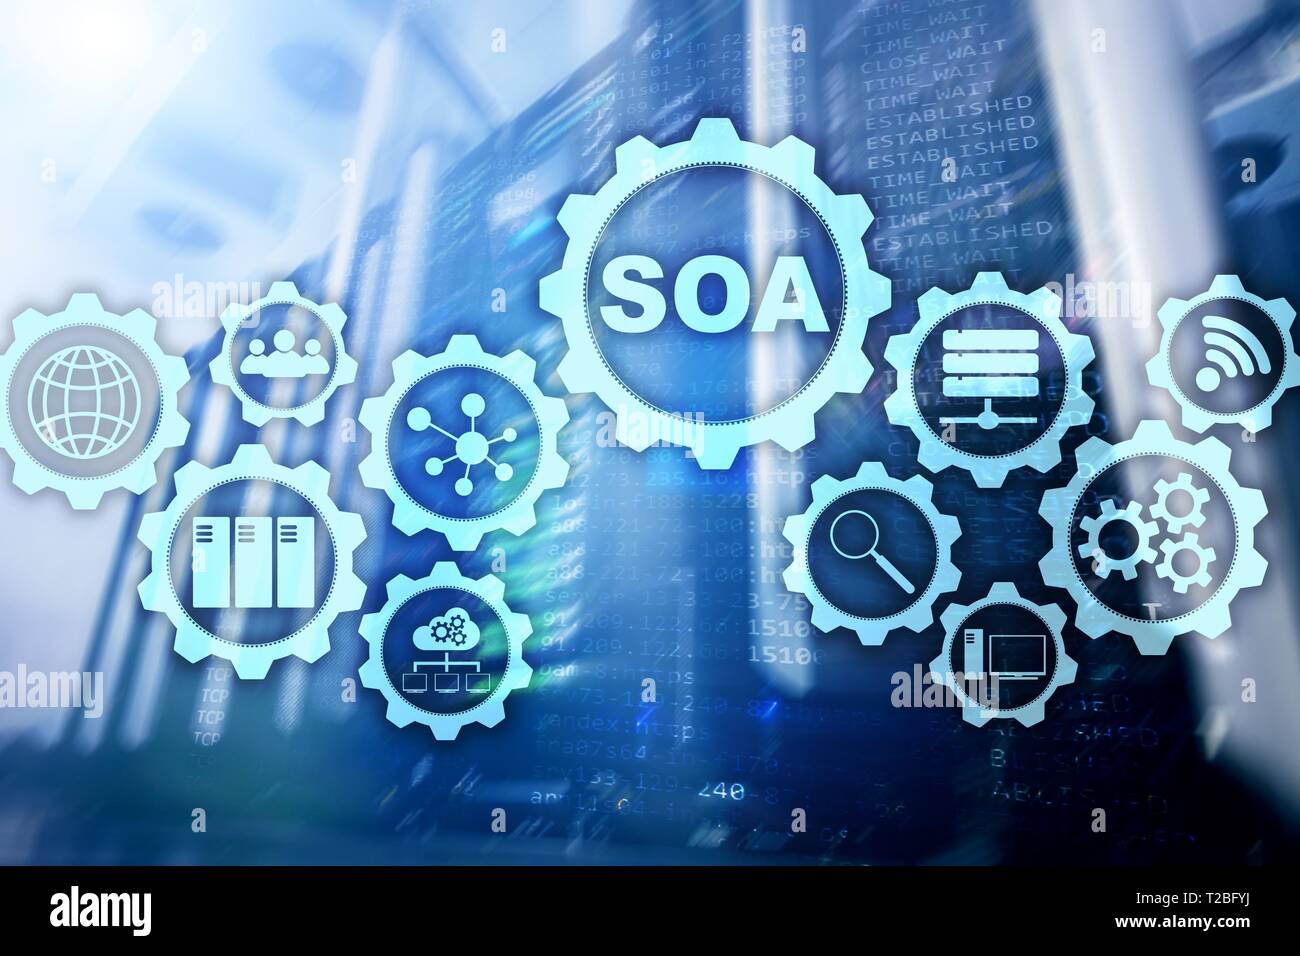 SOA. Business model and Information technology concept for Service Oriented Architecture under principle of service encapsulation. Stock Photo